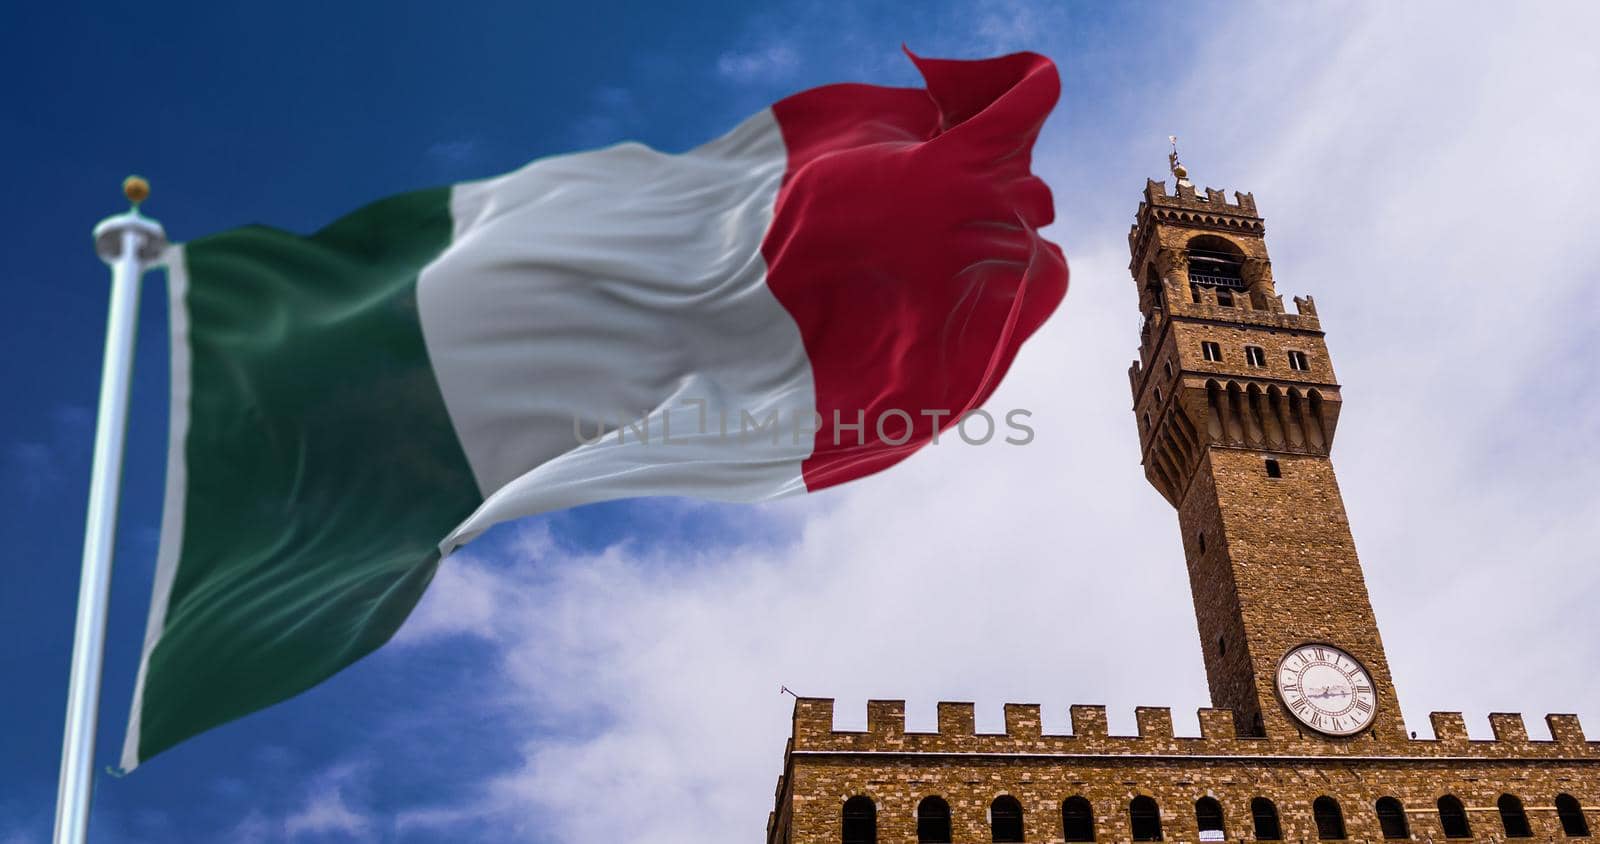 The Italian flag waving in the wind with the tower of Palazzo Vecchio in Florence in the background. Travel and tourist destinations. Art and architecture. World famous Italian historical monument